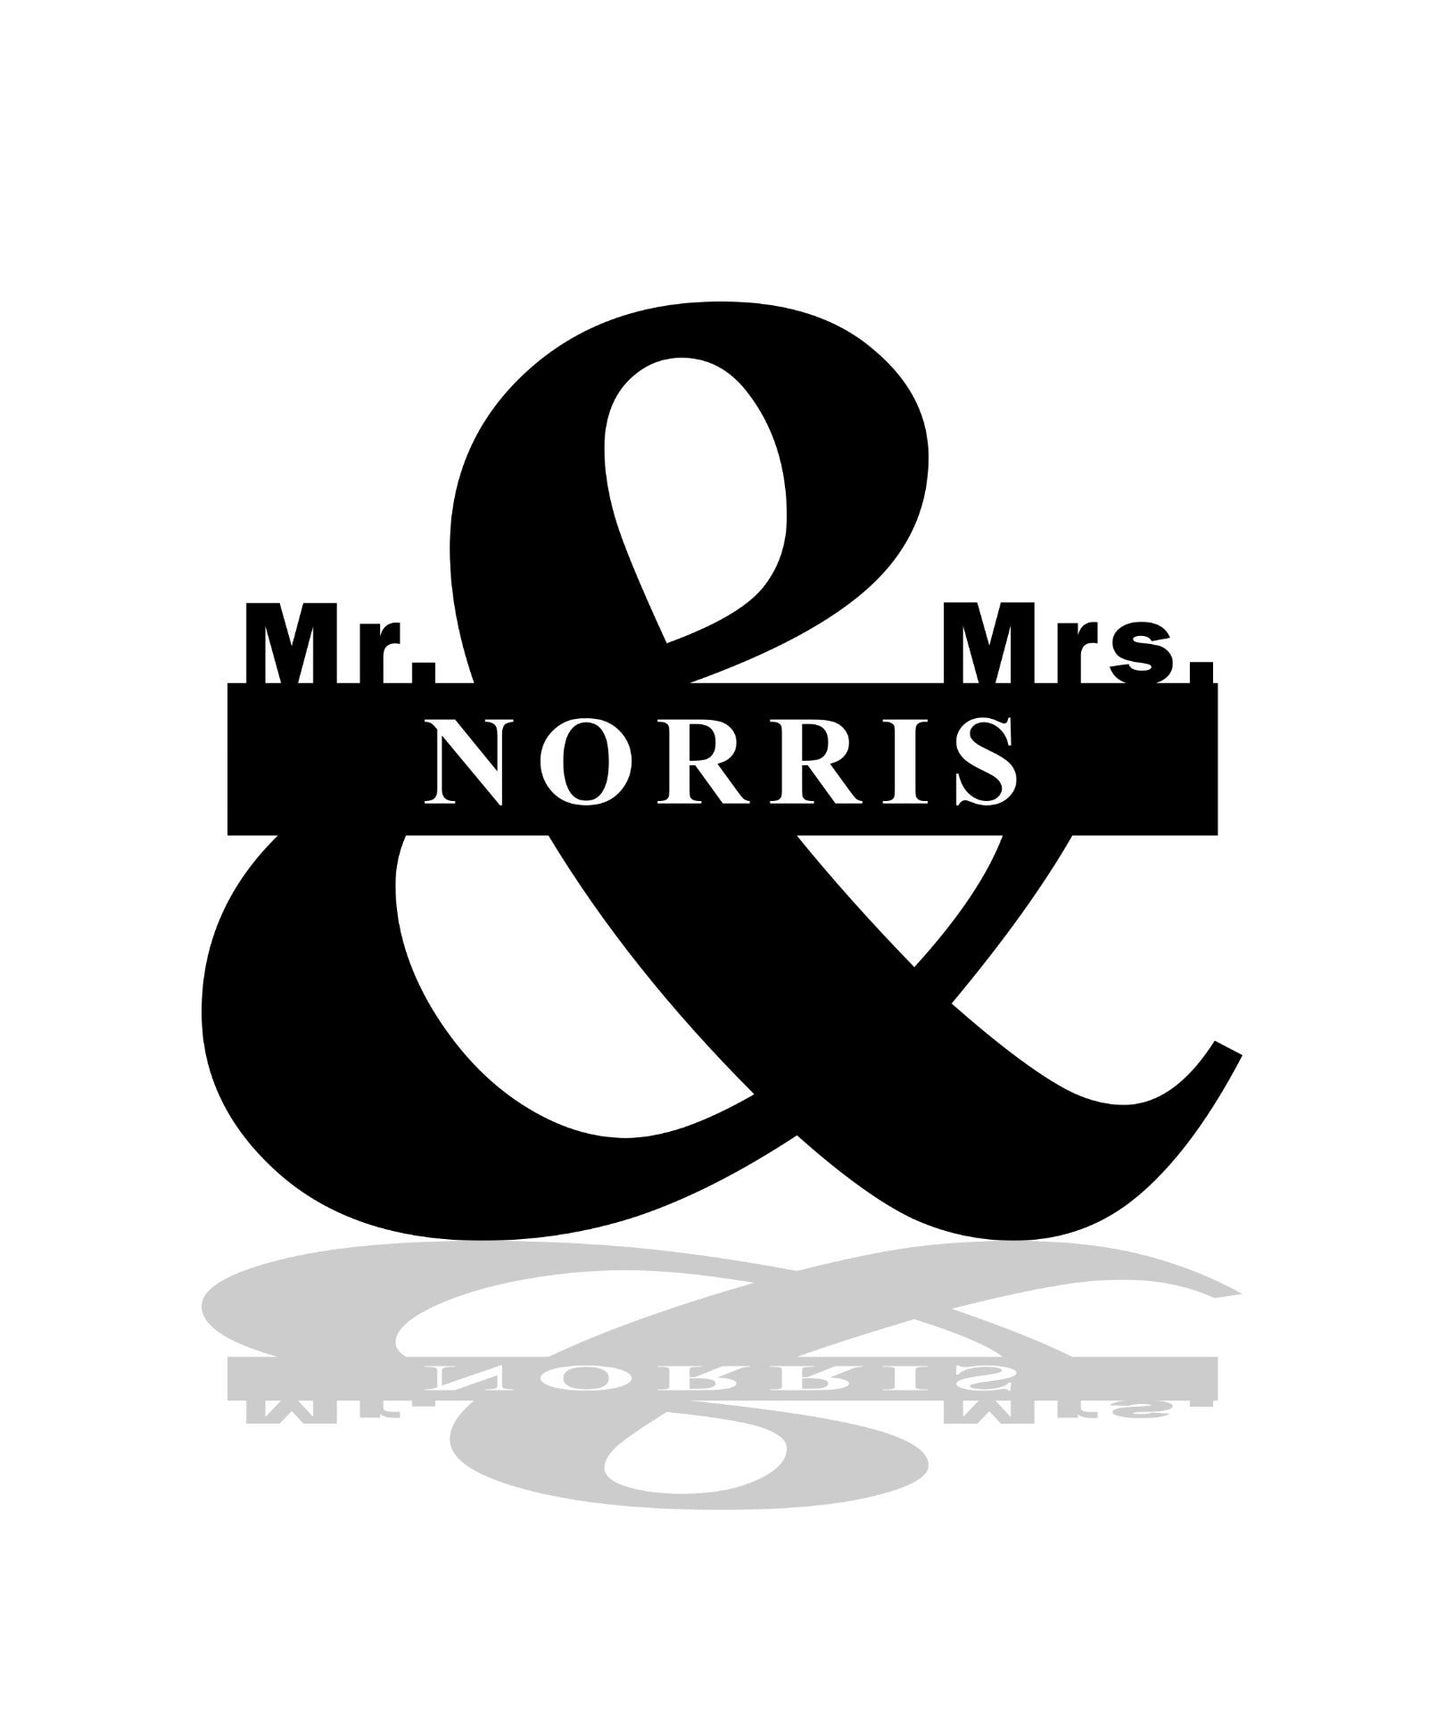 Wedding Gifts, Mr and Mrs gifts, Mr and Mrs Monogram